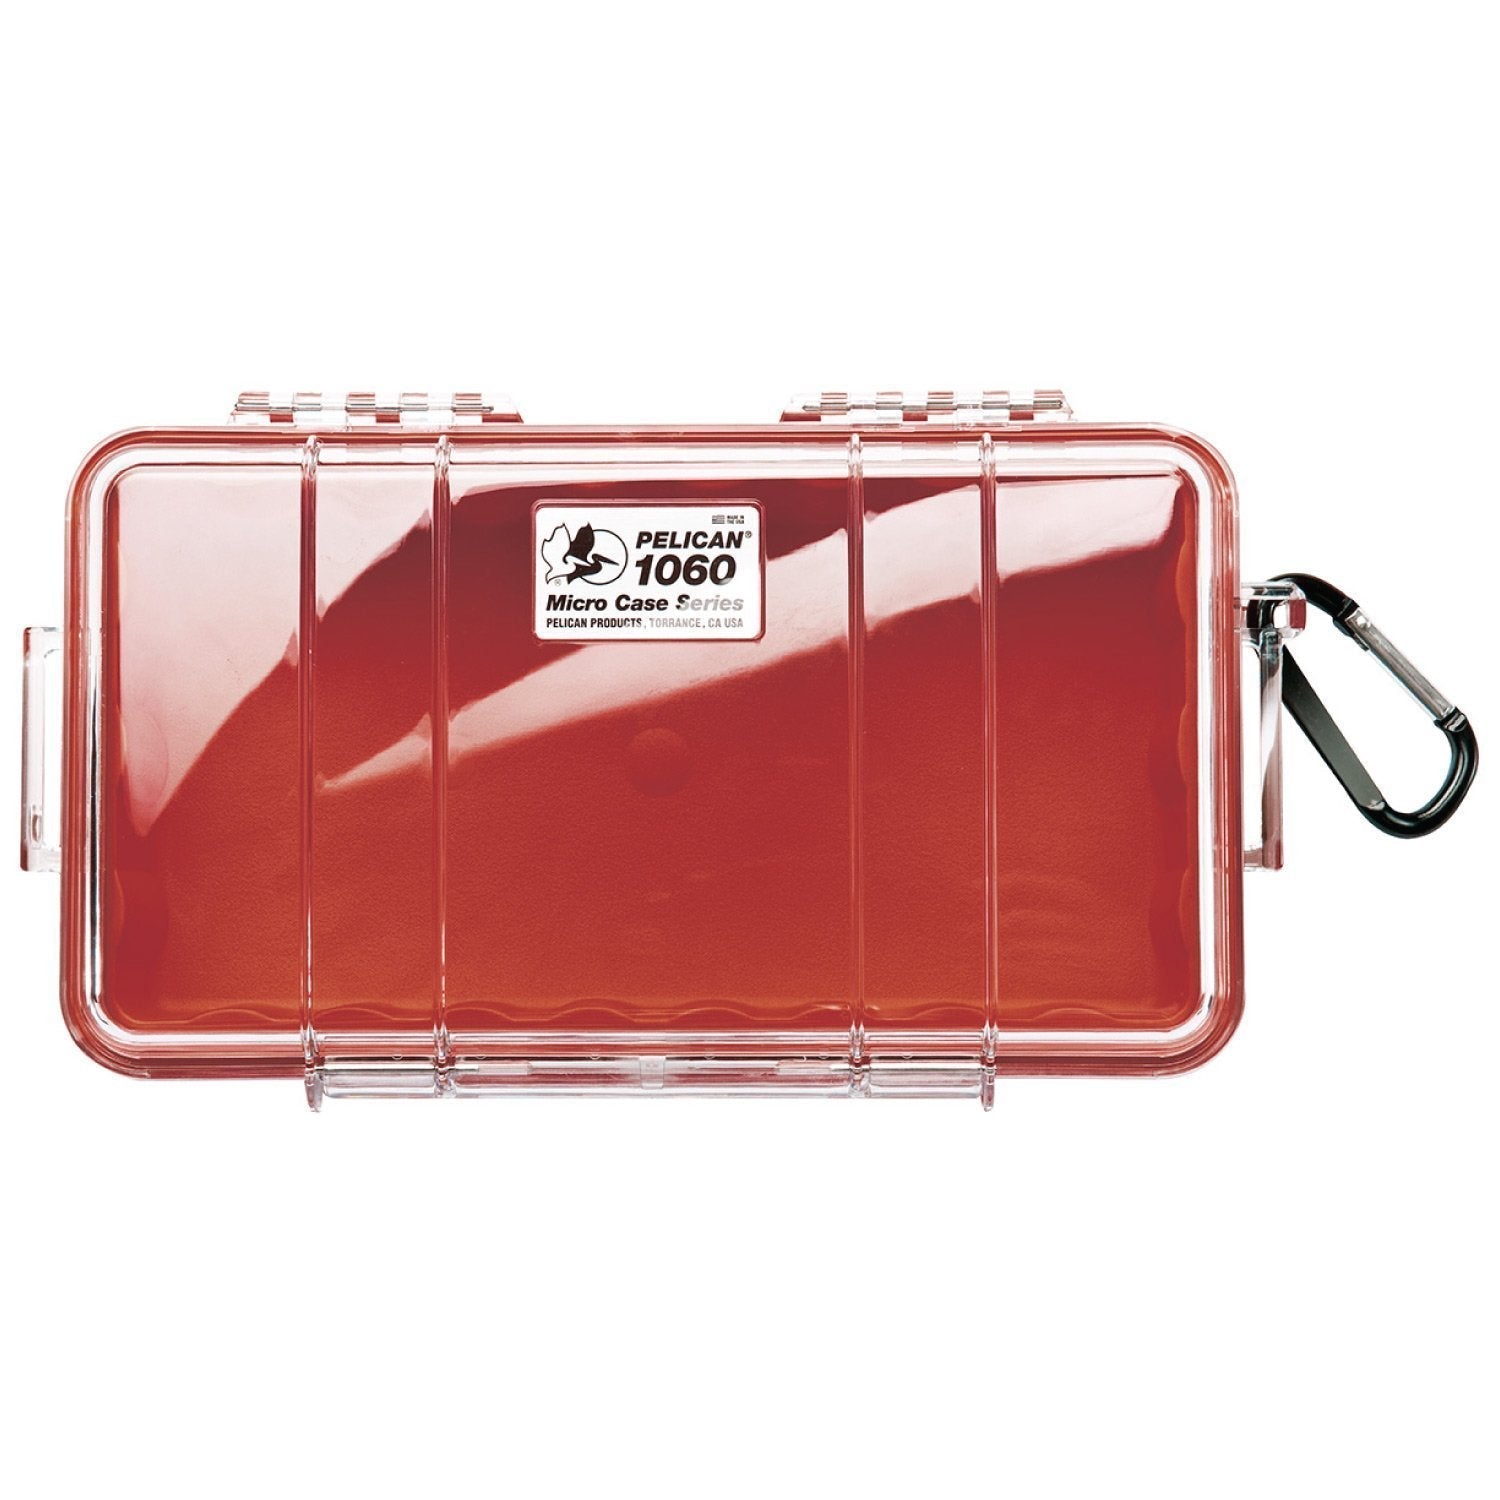 Pelican 1060 Micro Case Cases Pelican Products Clear Shell with Red Liner Tactical Gear Supplier Tactical Distributors Australia